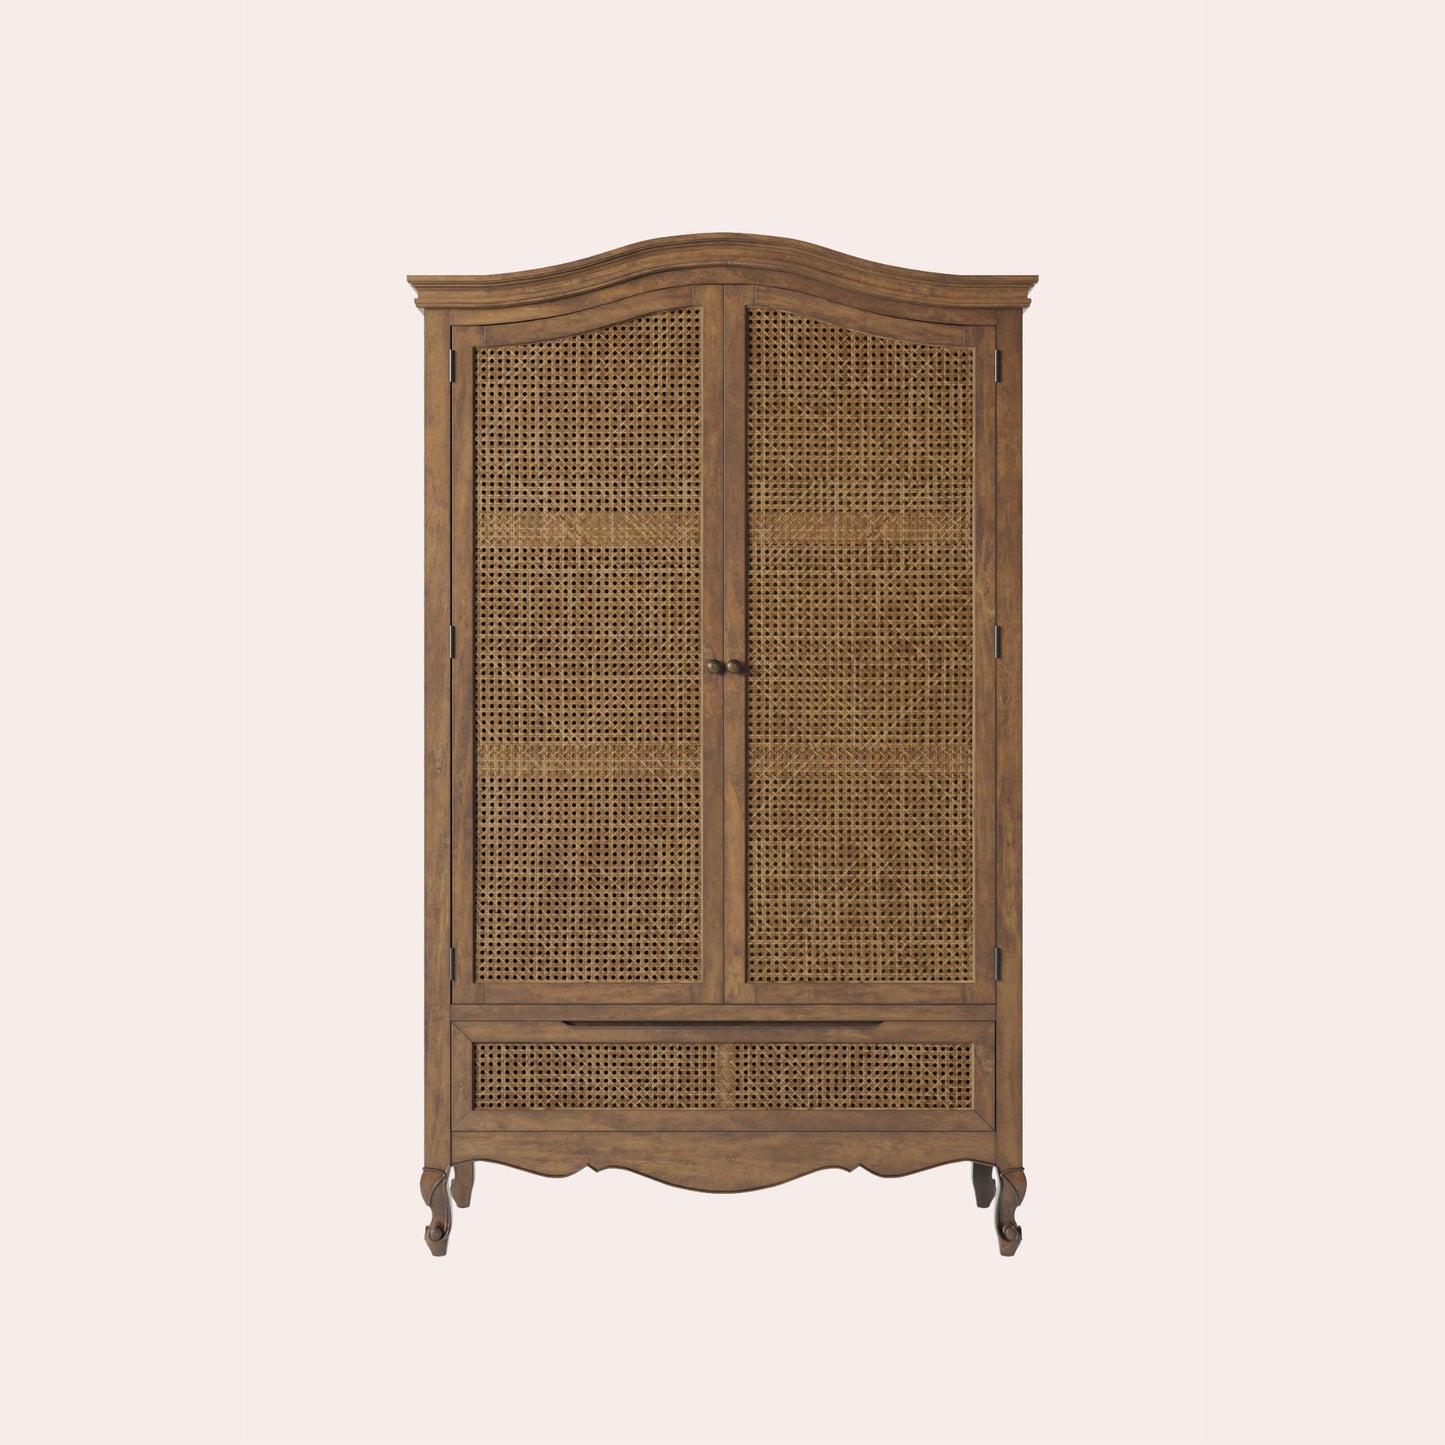 Front of walnut wardrobe with rattan inset doors and single bottom drawer